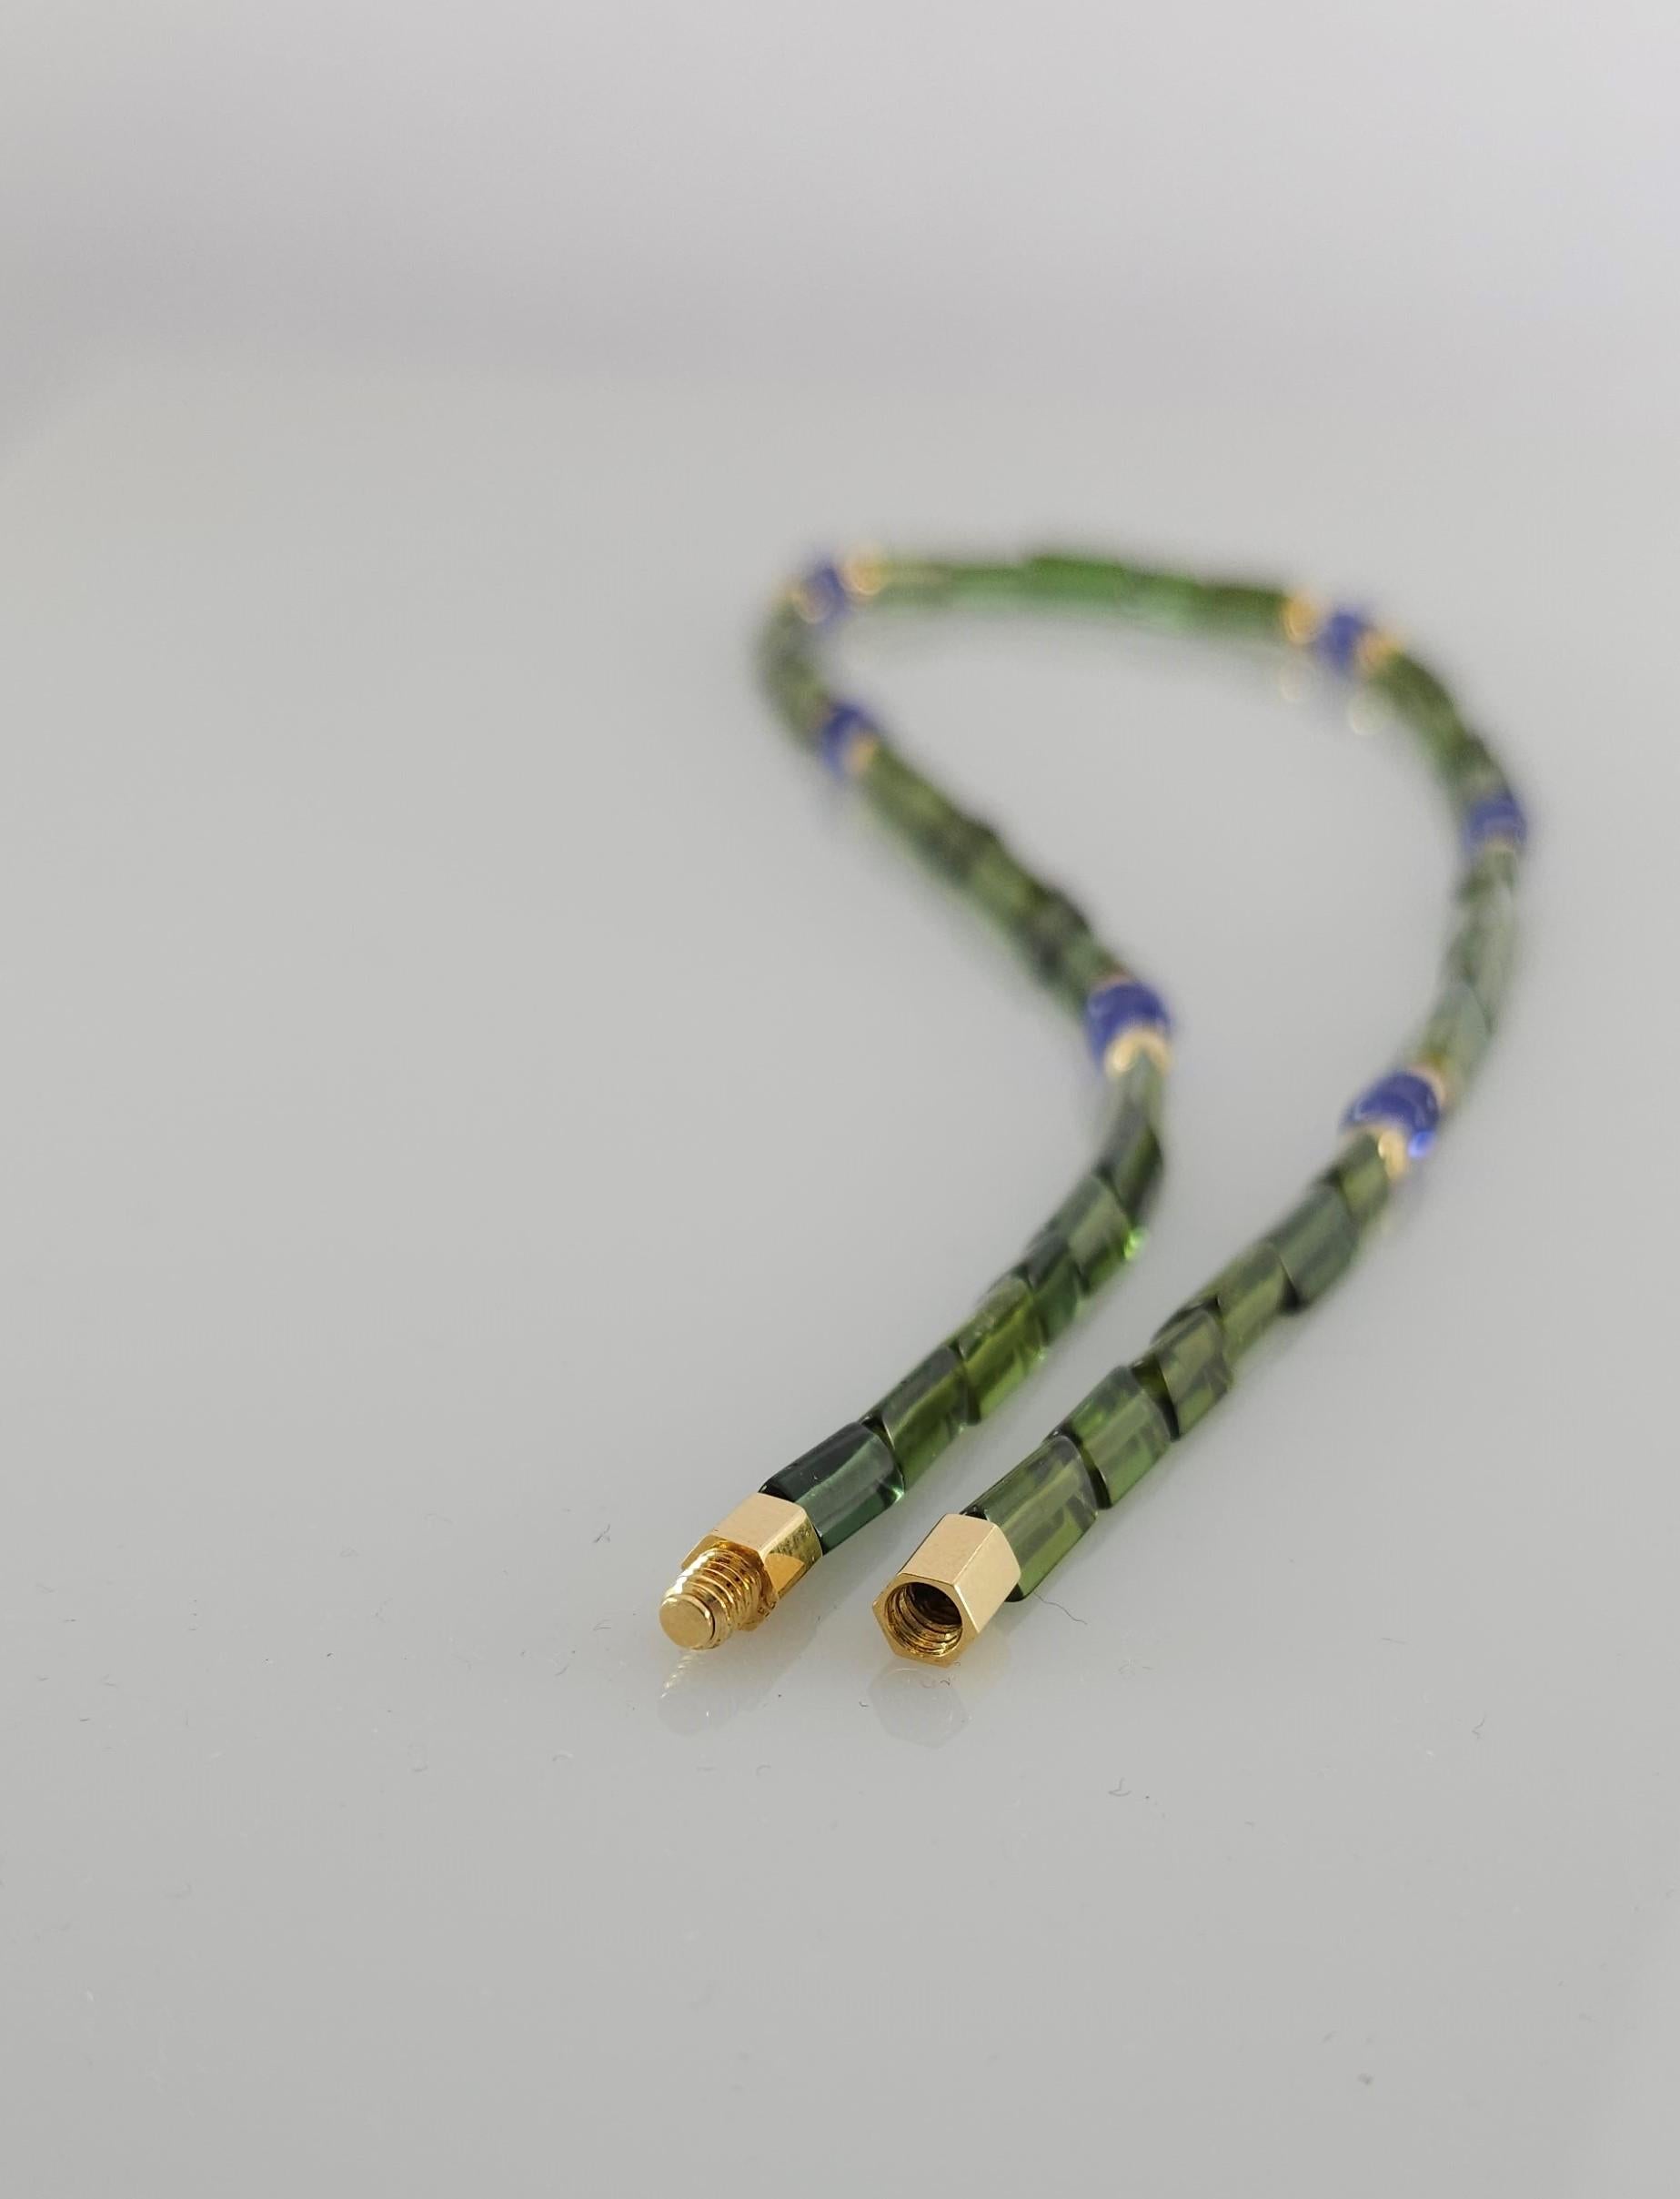 Green Tourmaline Crystal & Tanzanite Beaded Necklace with 18 Carat yellow Gold For Sale 2